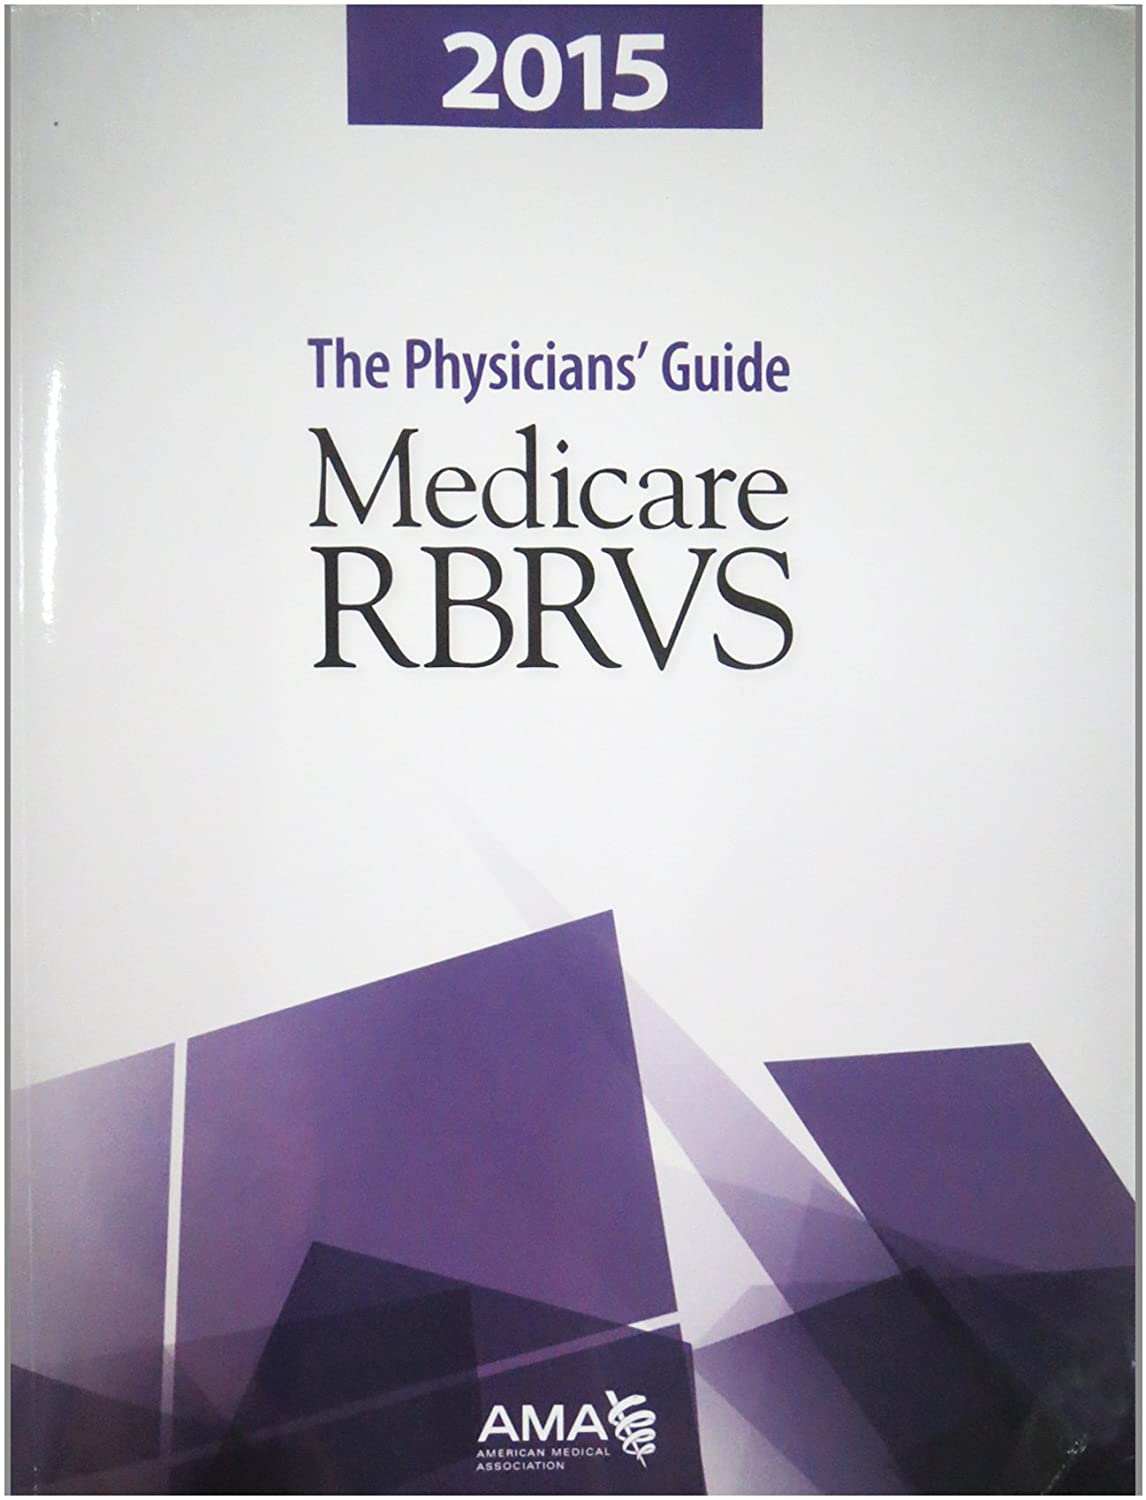 Medicare RBRVS 2015: The Physicians' Guide: The Physician's Guide (Medicare RBRVS (AMA))